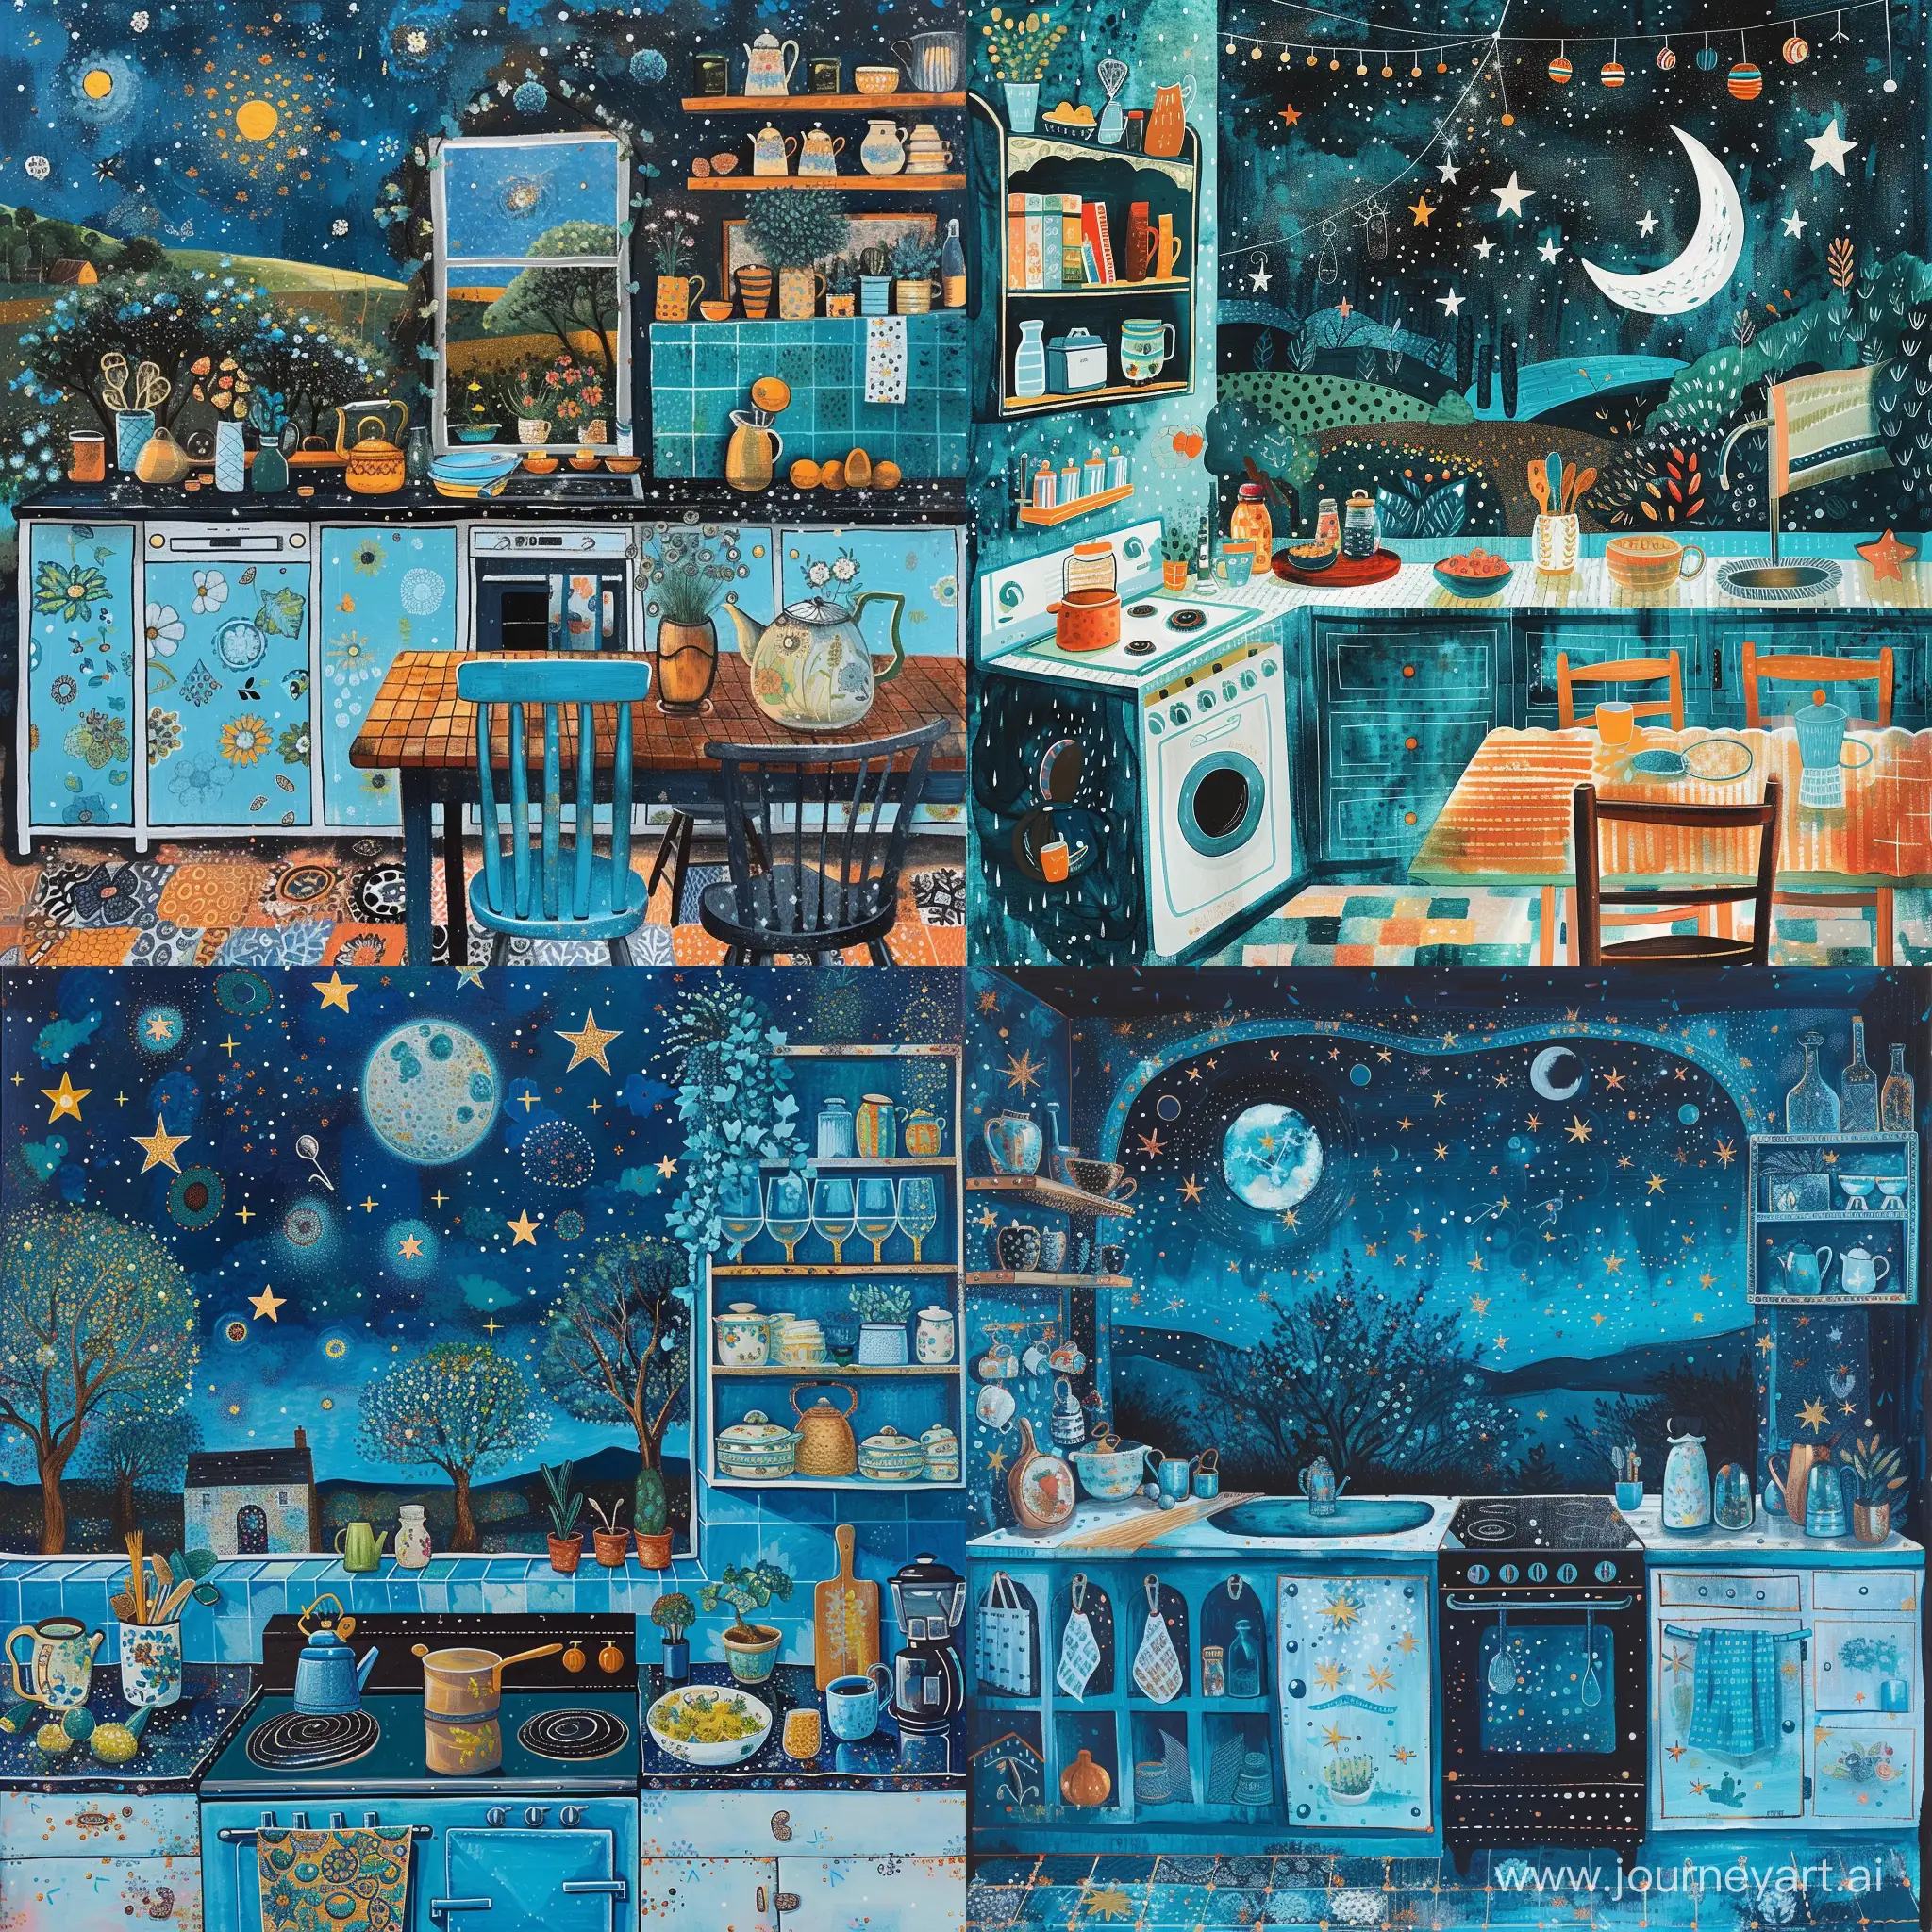 Charming-Night-Kitchen-Whimsical-Rural-Scene-in-Blue-and-Teal